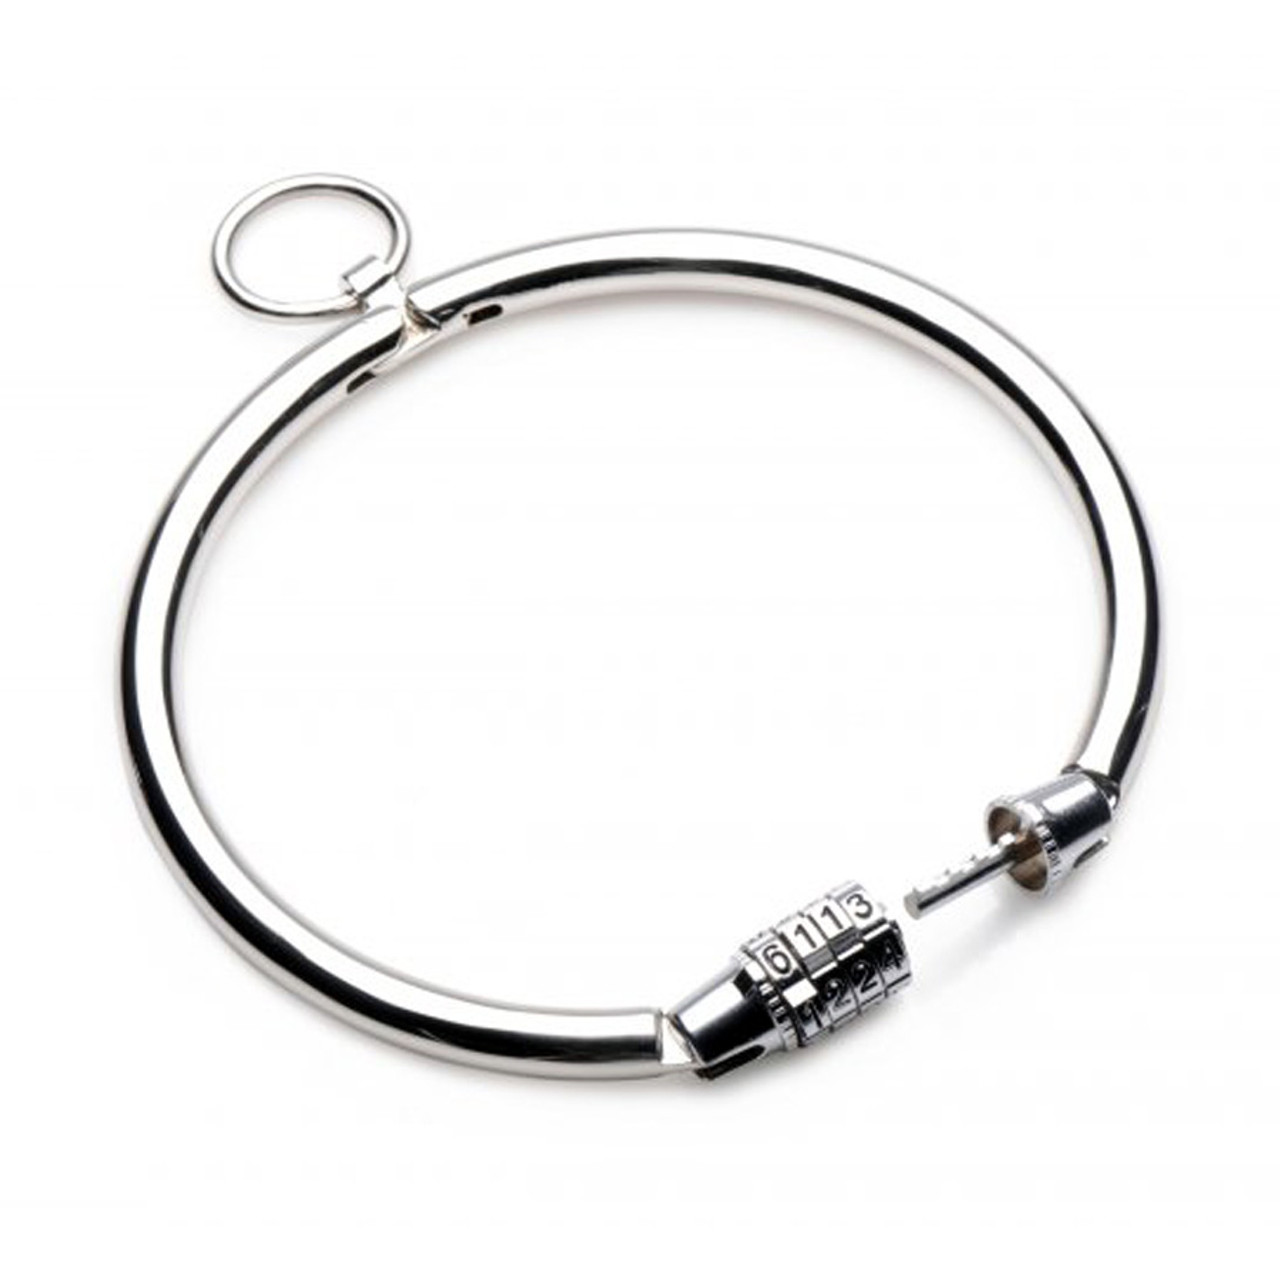 Buy The Stainless Steel Slim Slave Collar With Combination Lock Xr